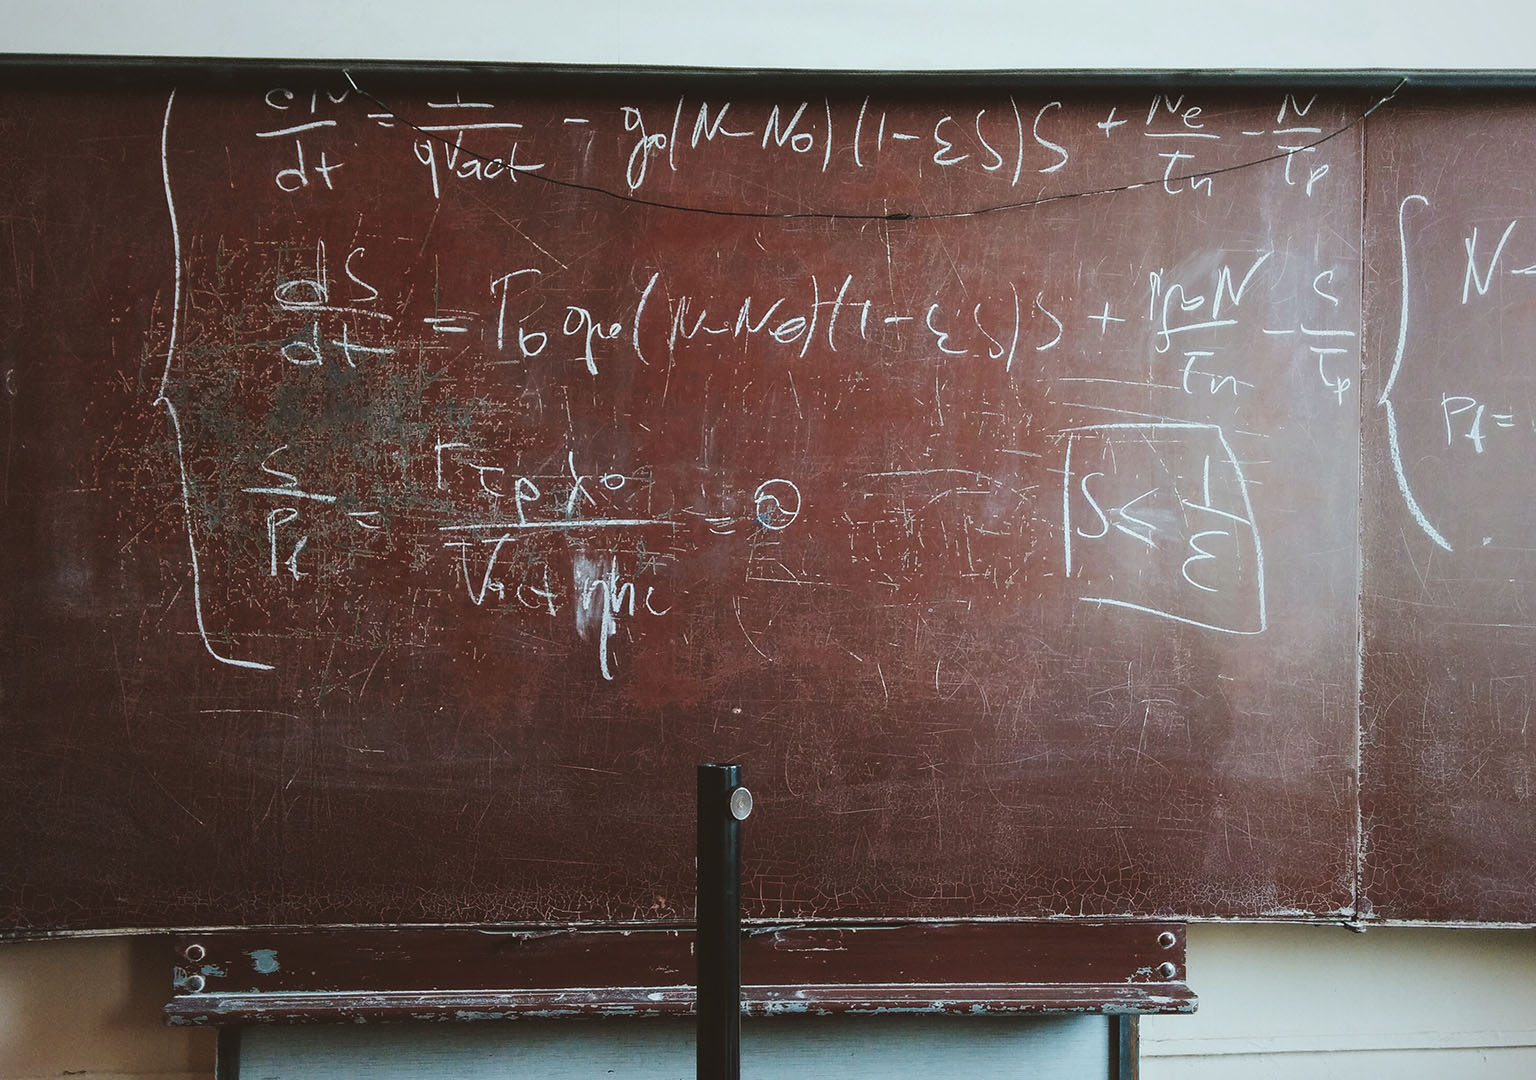 Behavioral economics and motivation research: Equations on a chalkboard